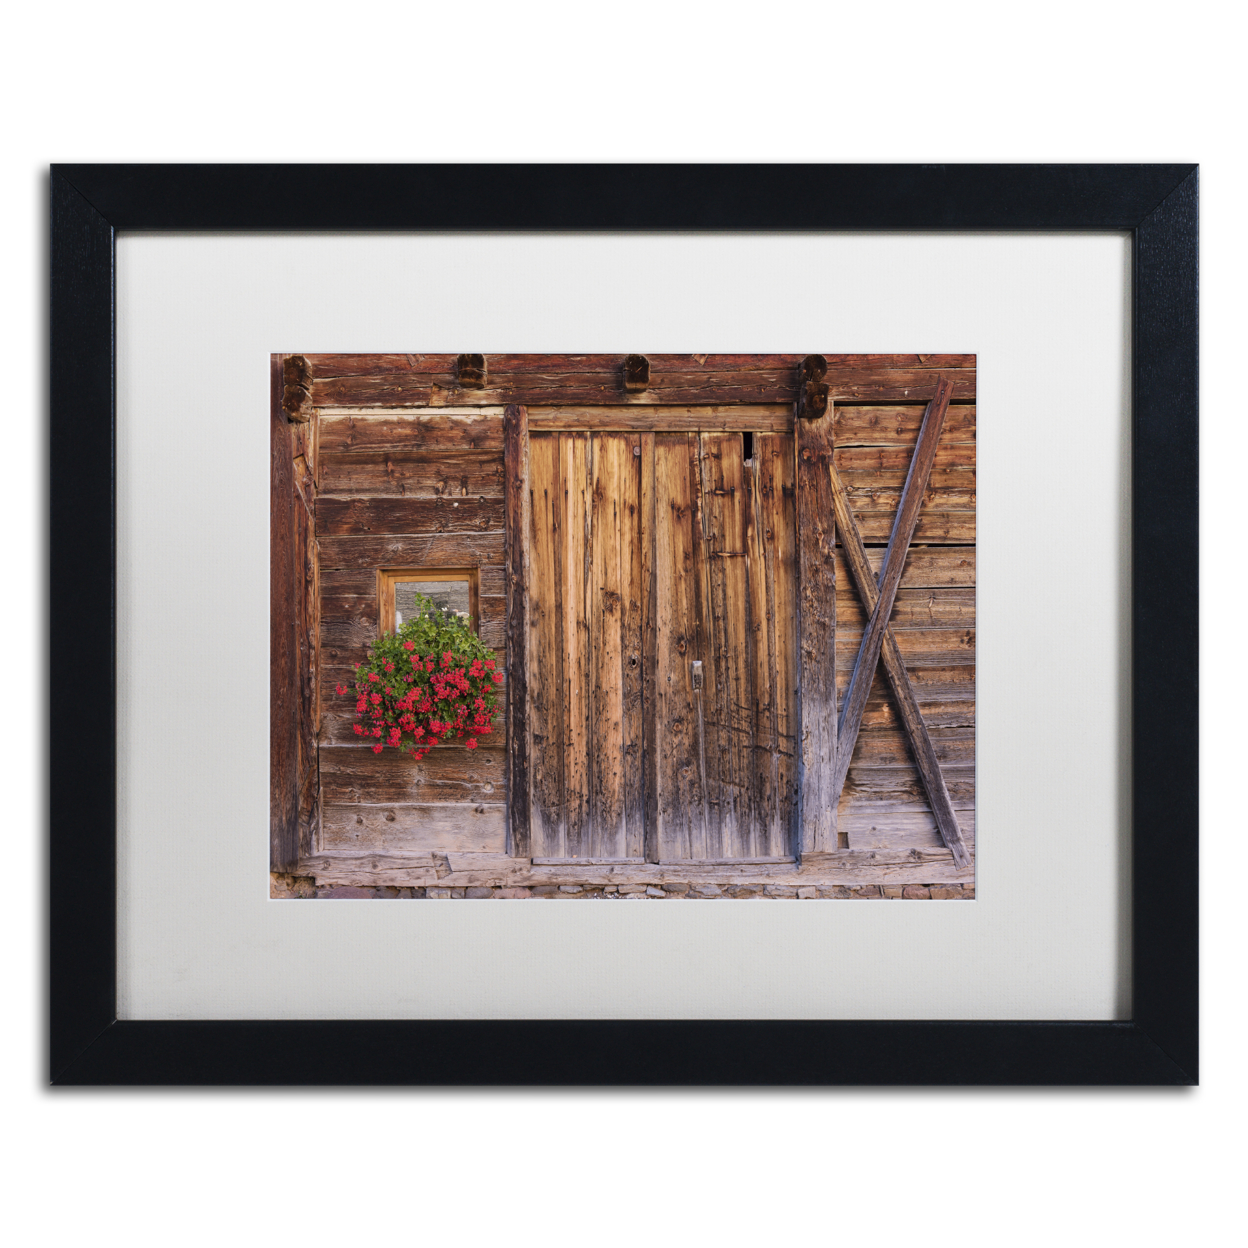 Michael Blanchette Photography 'Rustic Charm' Black Wooden Framed Art 18 X 22 Inches